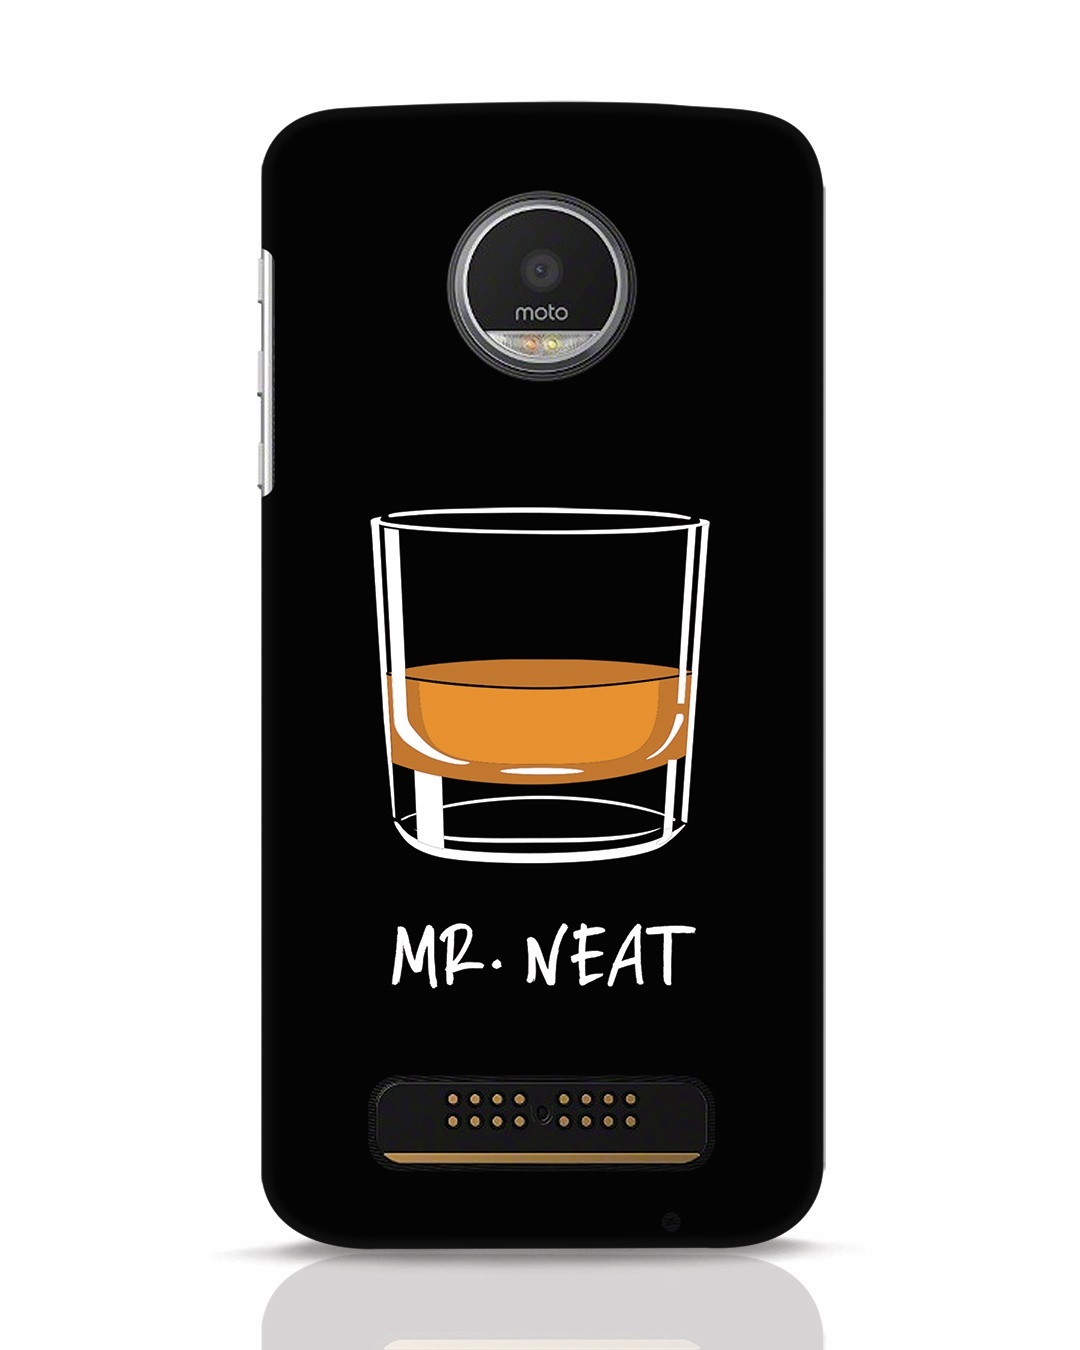 Mr.neat Moto Z Play Mobile Cover Moto Z Play Mobile Covers Bewakoof.com